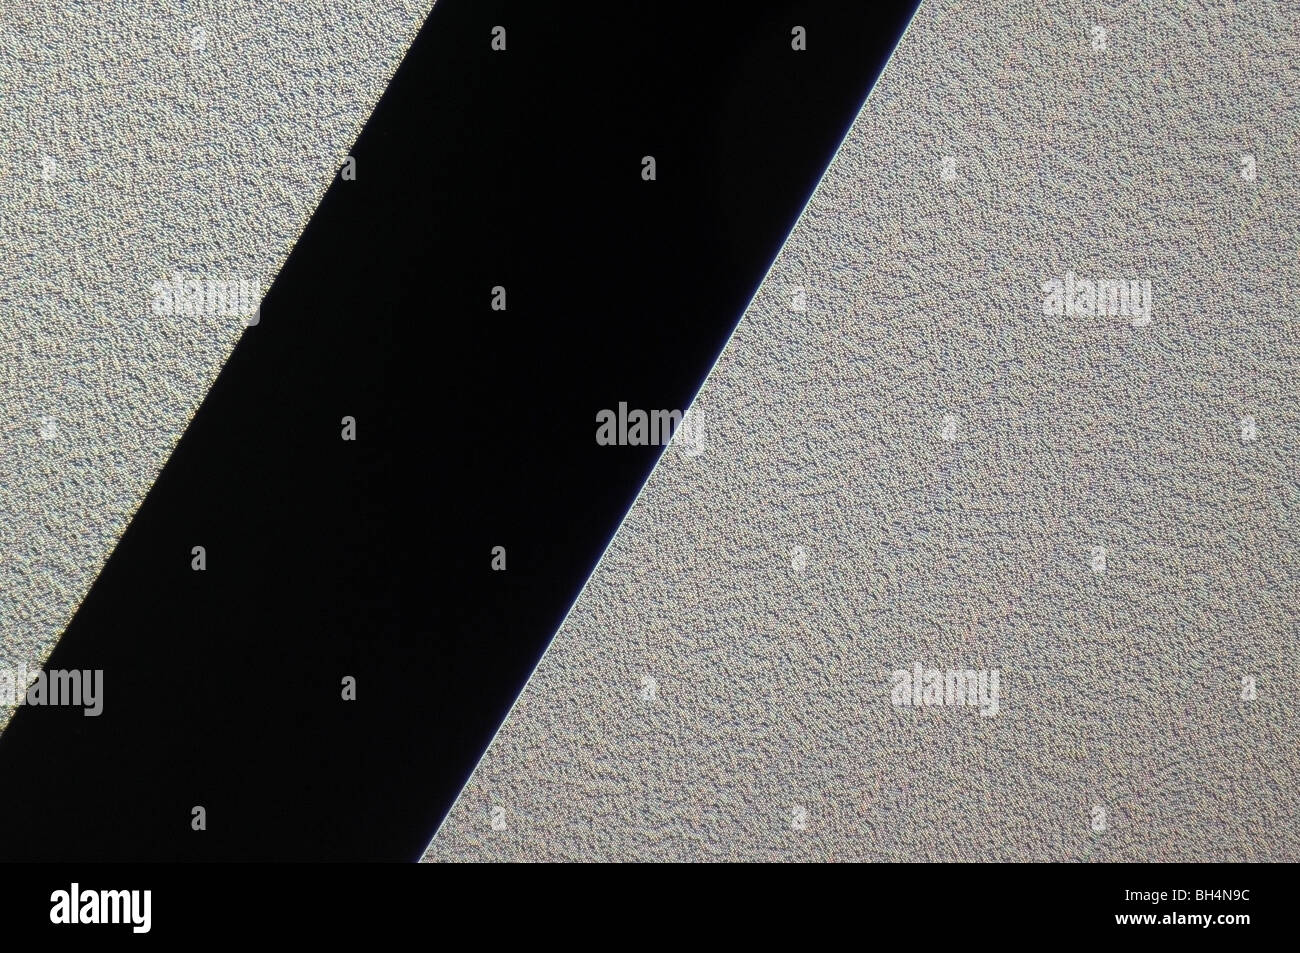 the laser dots on the surface of a music CD Stock Photo